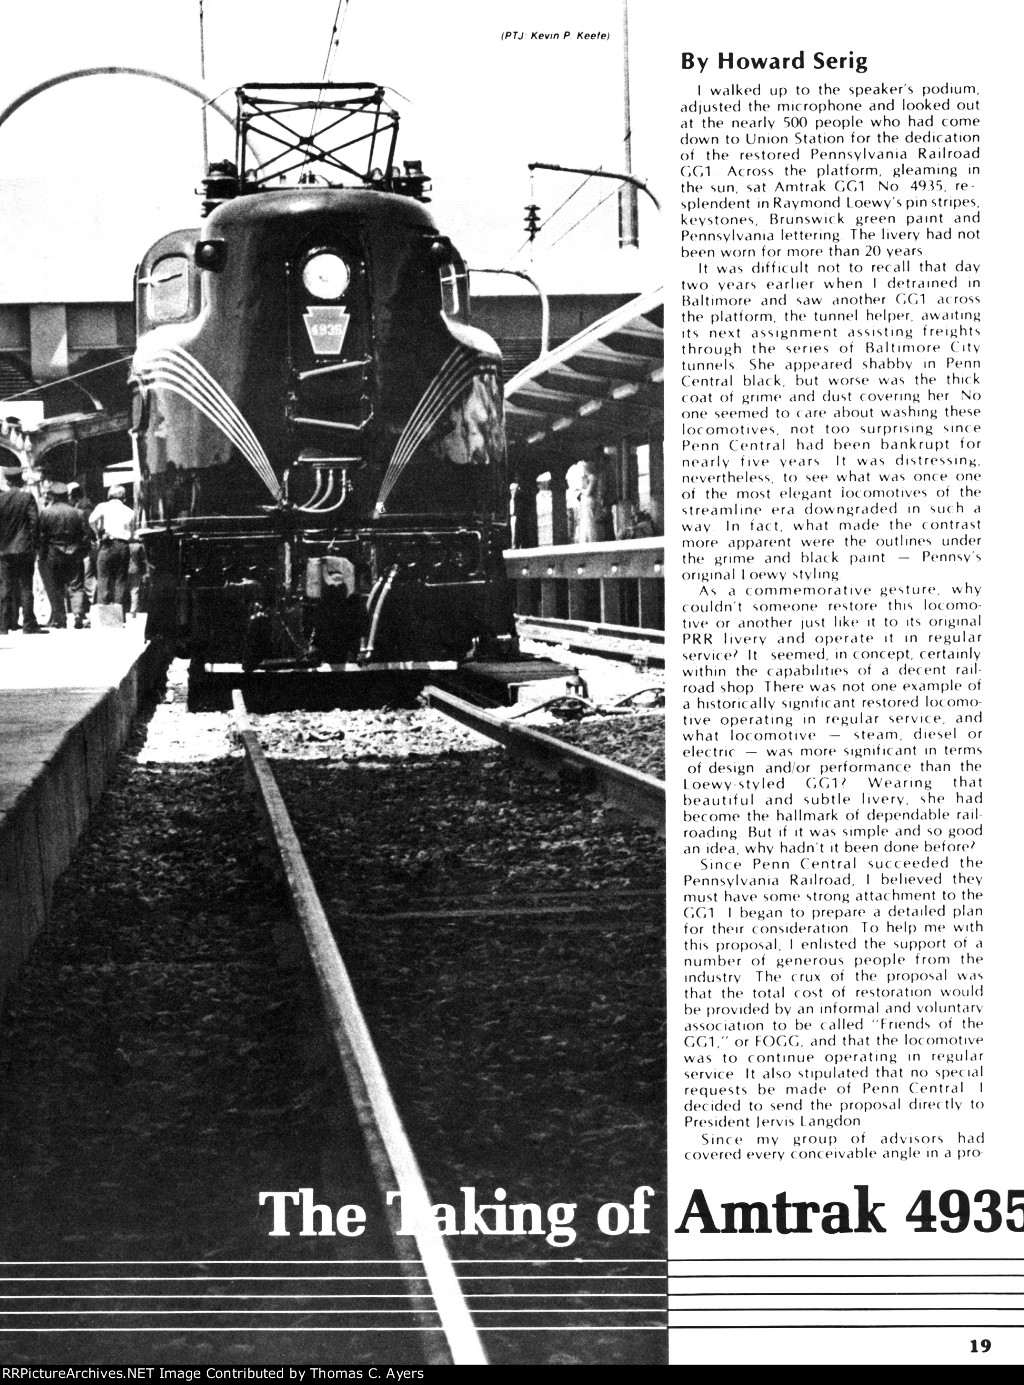 "Taking Of Amtrak 4935," Page 19, 1977